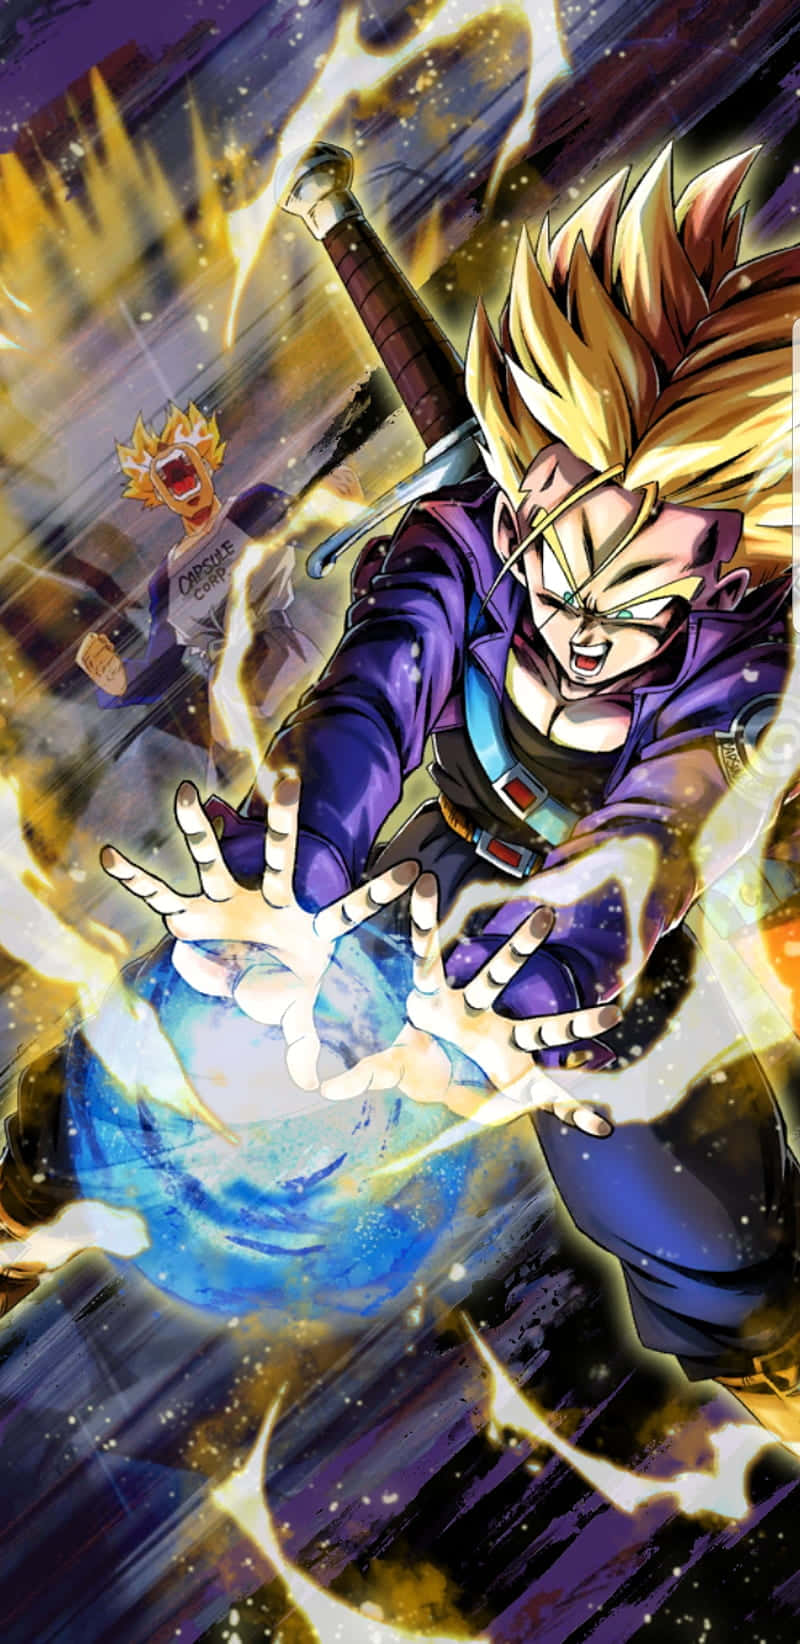 Download Trunks from the anime Dragon Ball Z locks eyes with the  approaching enemy. Wallpaper | Wallpapers.com